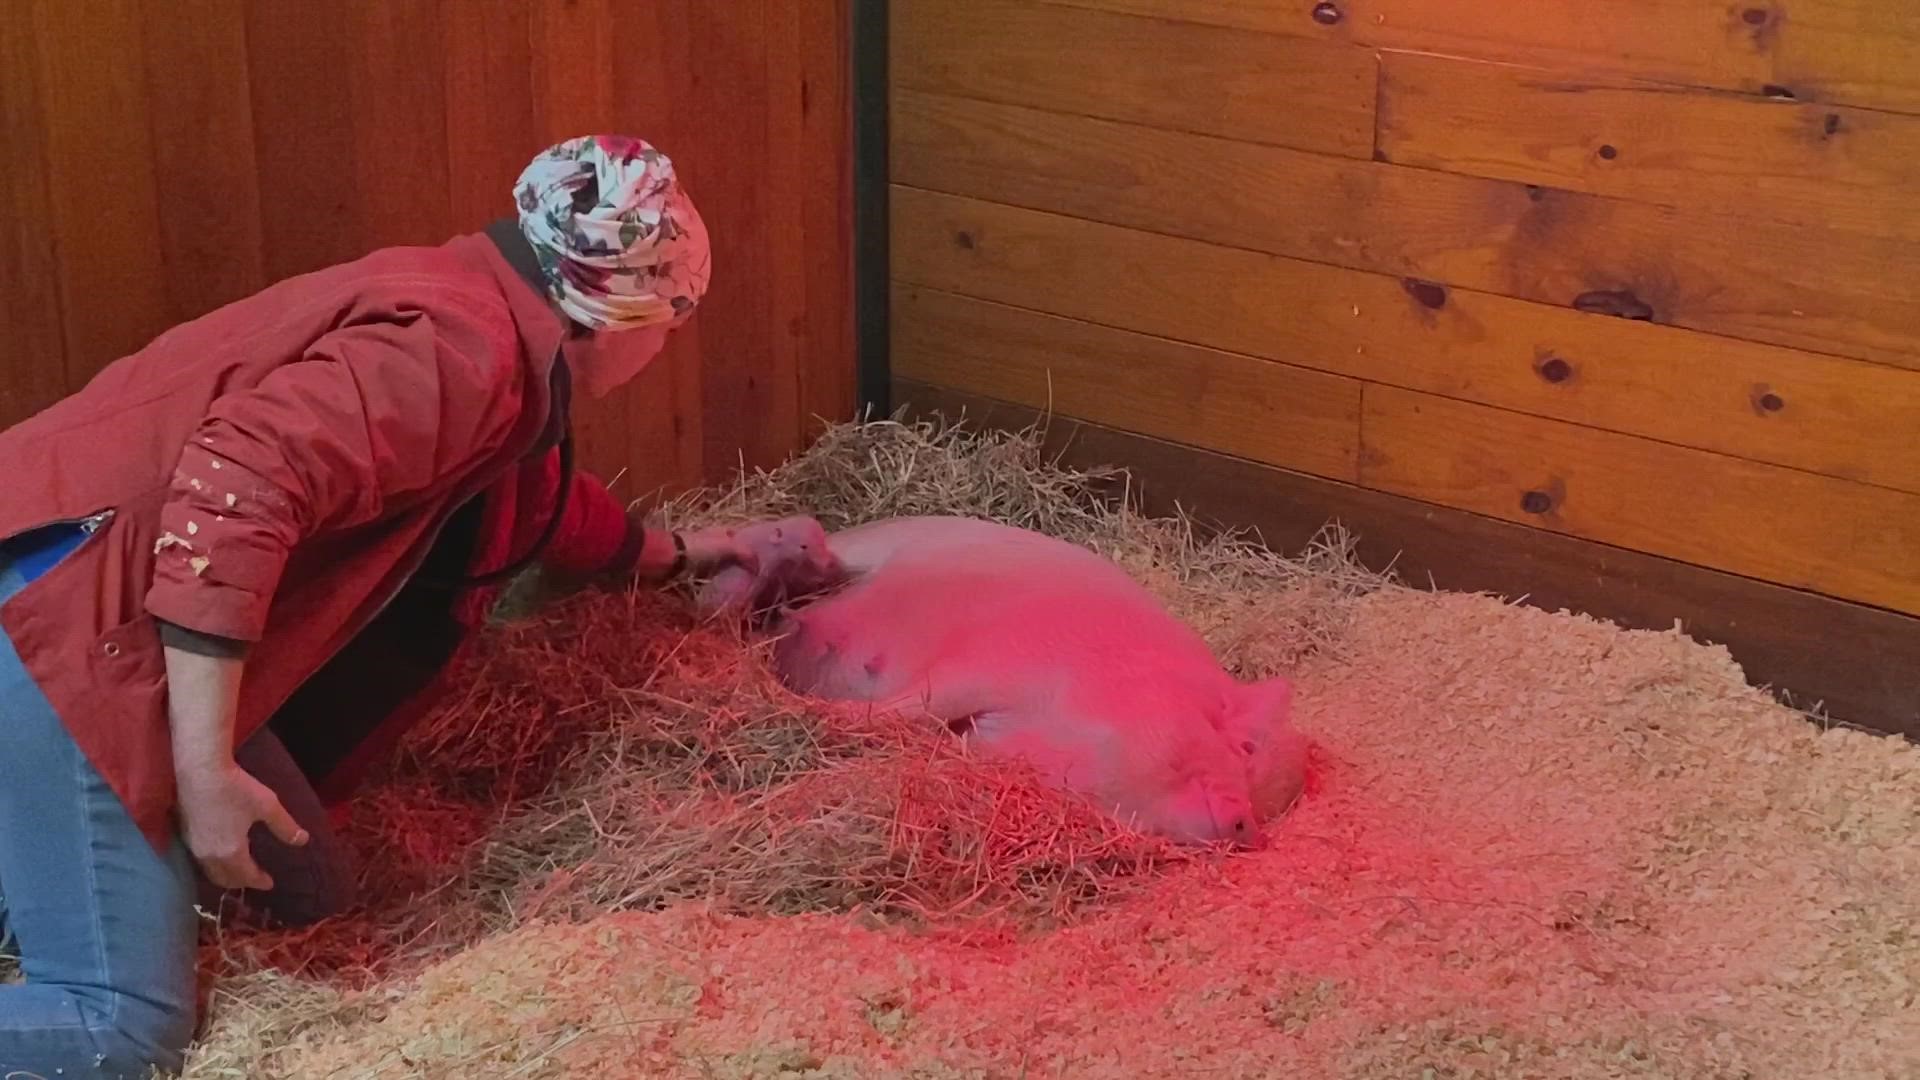 Juno the pig gave birth earlier than expected during her nesting livestream with the Houston SPCA. Video courtesy of Houston SPCA.